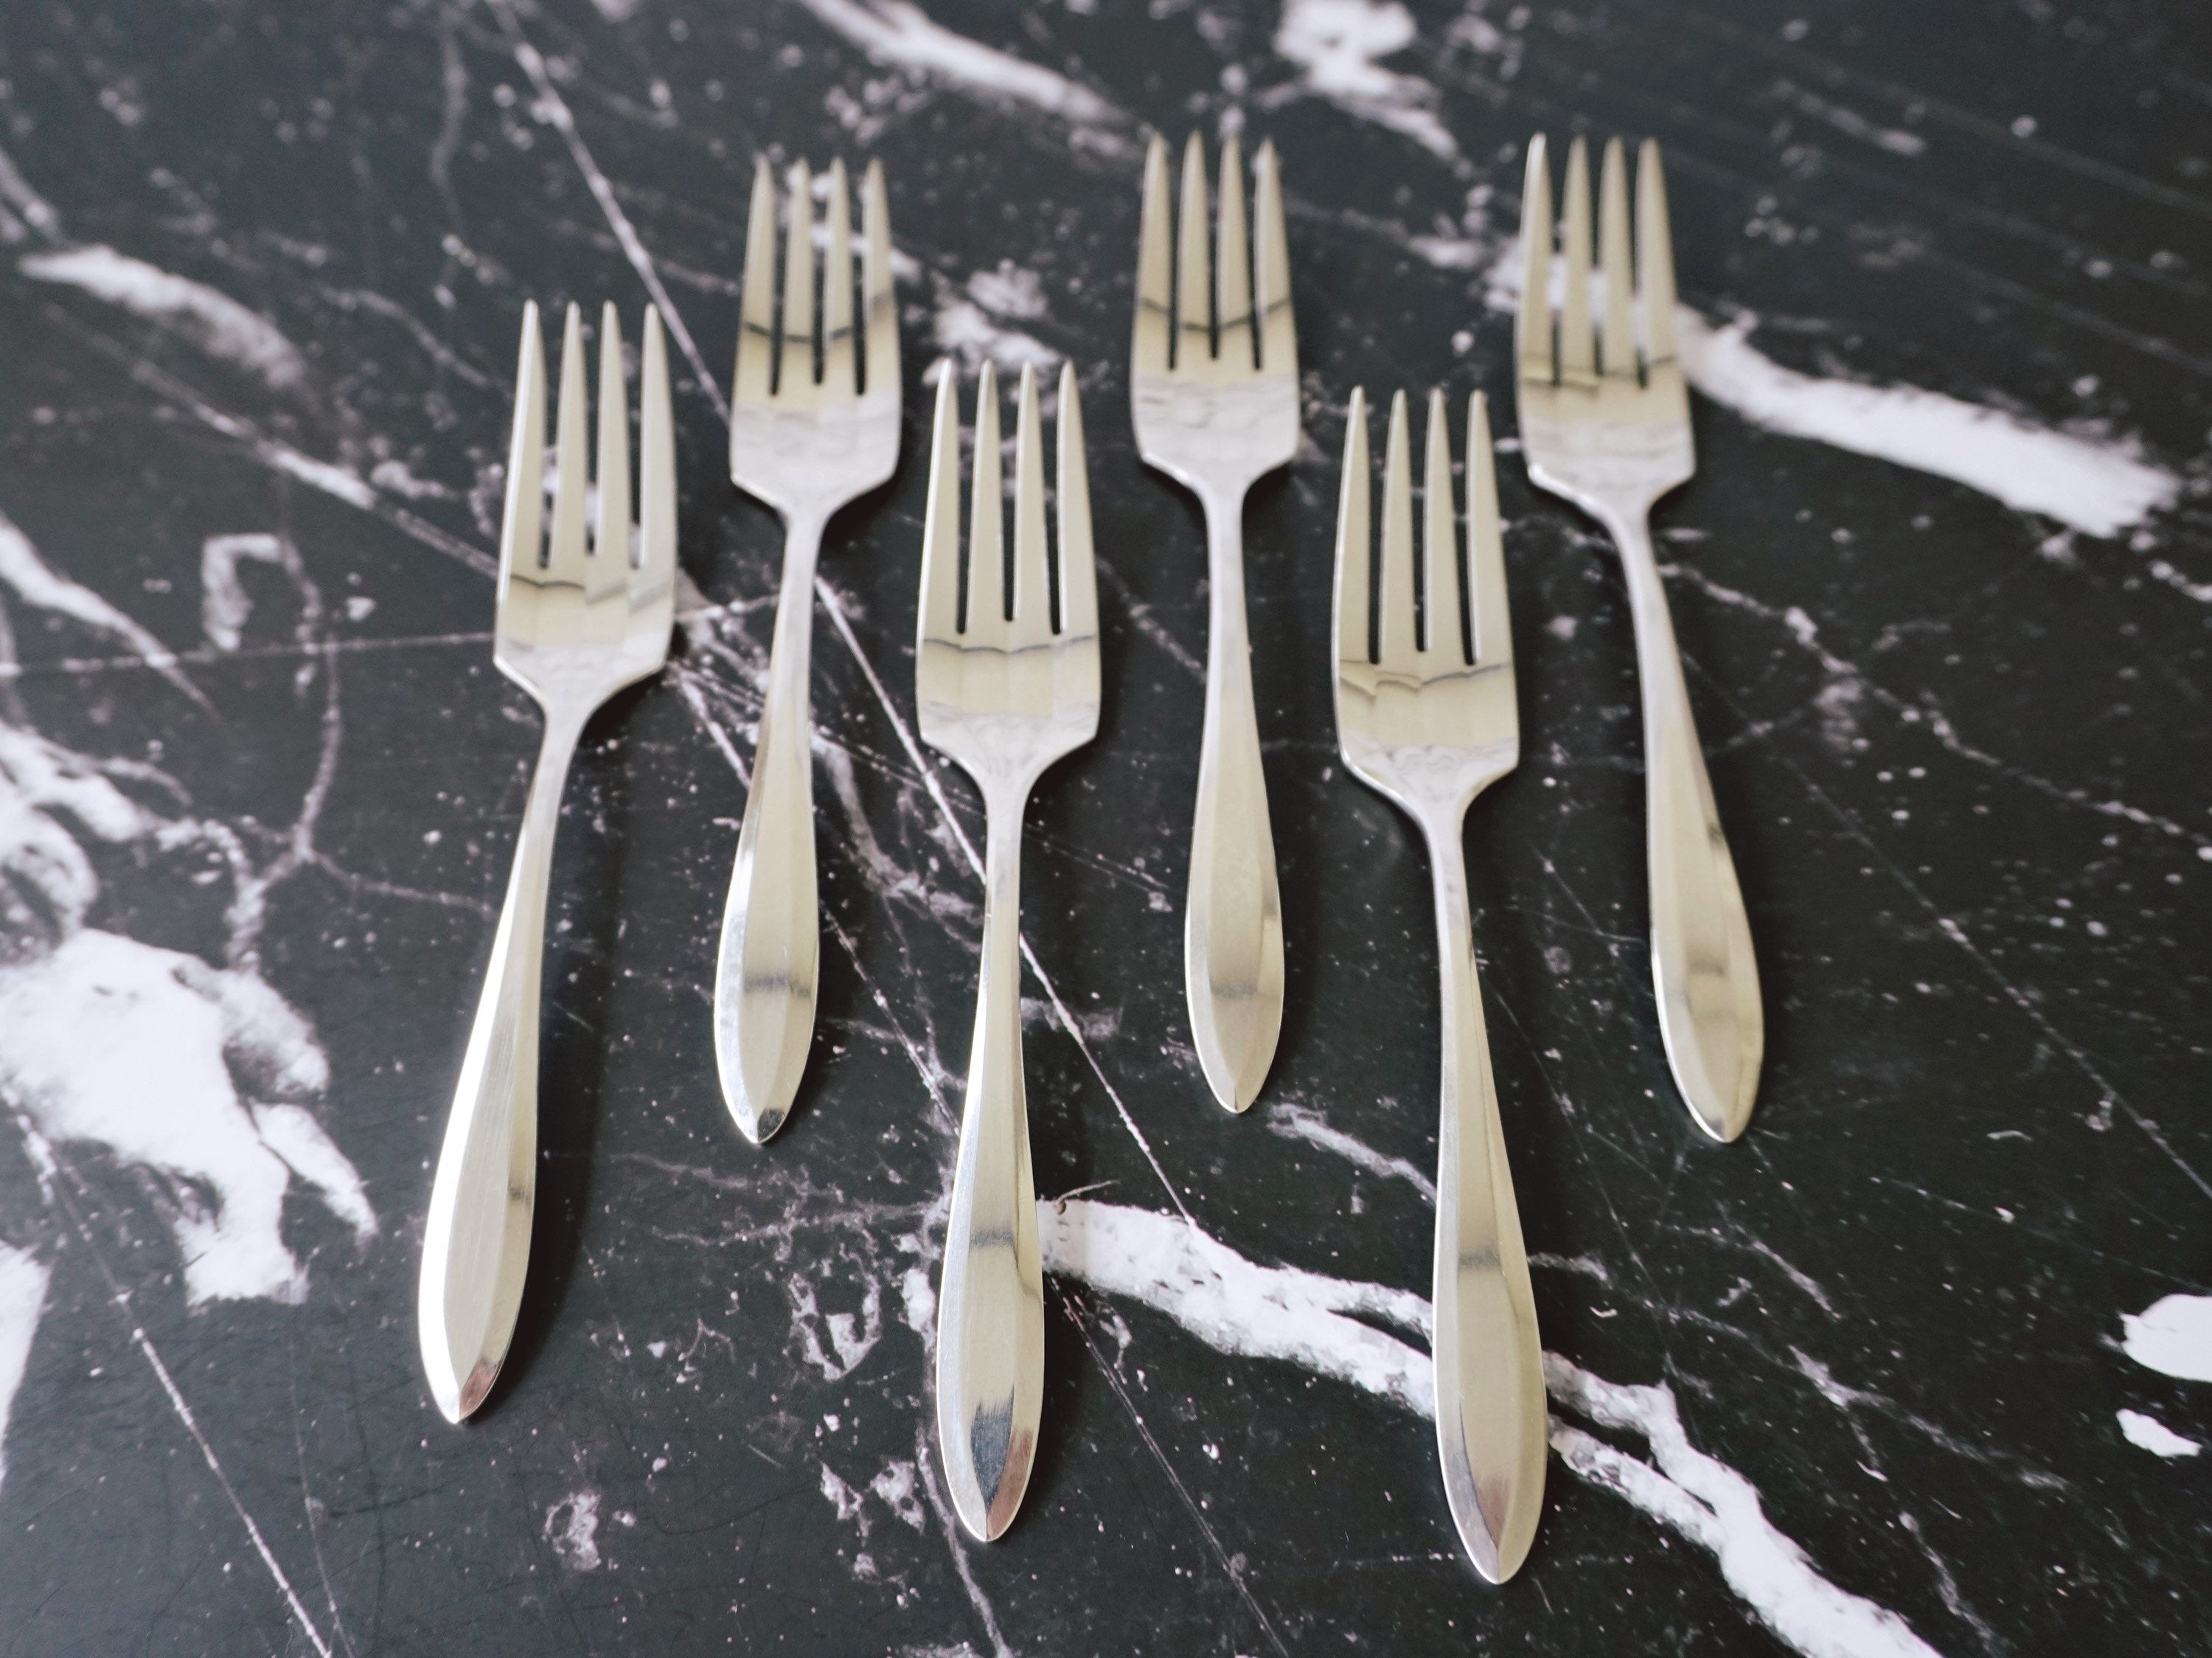 Set of 6 Vintage Silver-Plated Dinner Fork in Original Box | Rogers & Bro A1 Antique Silverware - Urban Nomad NYC